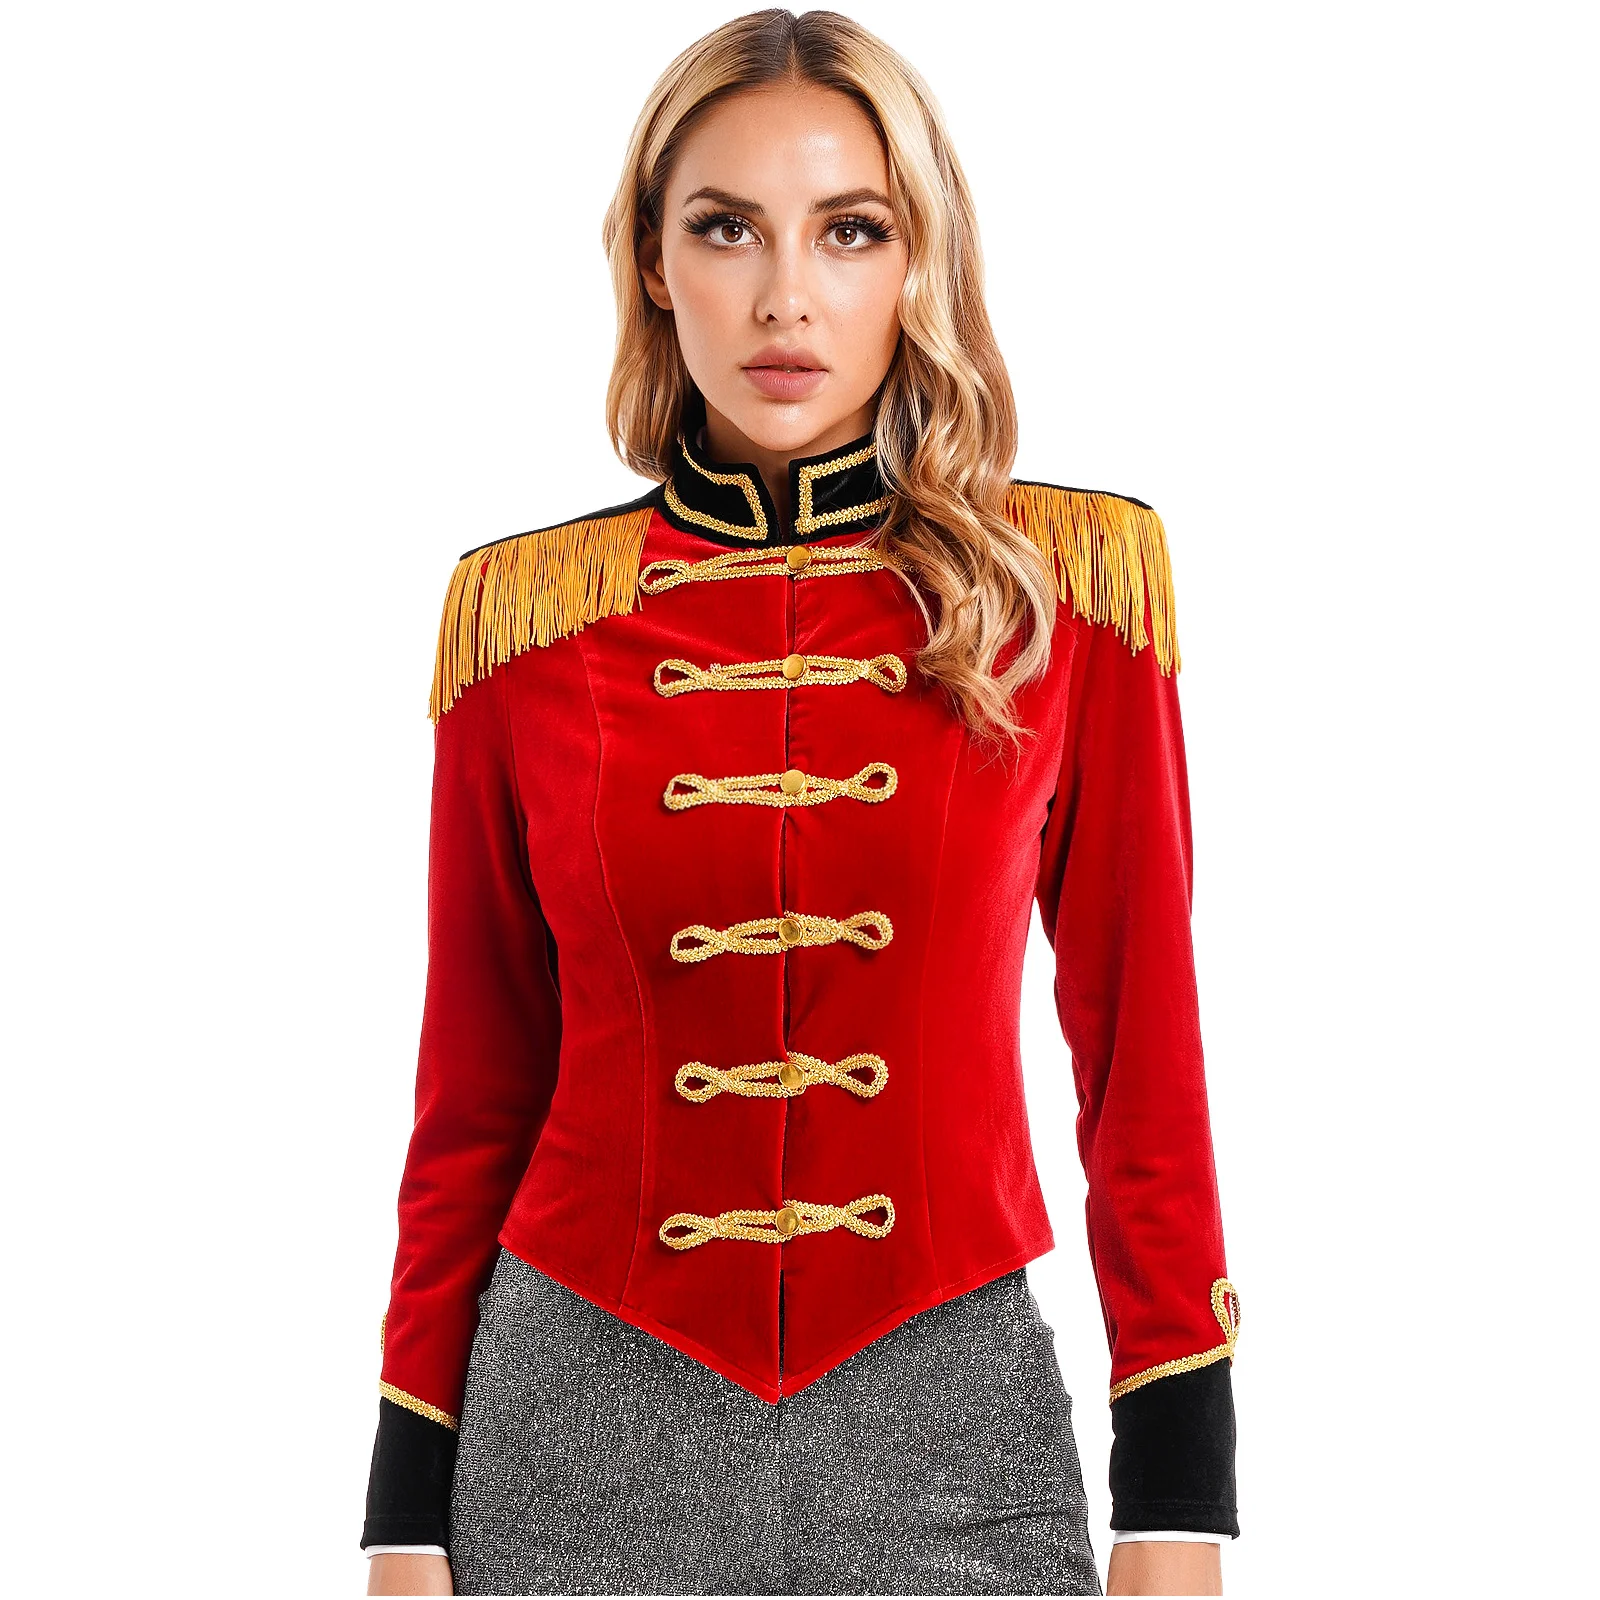 Womens Circus Ringmaster Costume Stand Collar Fringed Shoulder Board Velvet Jacket Coat Halloween Carnival Party Cosplay Costume anime to your eternity fushi cosplay costume hooded coat pants outfits halloween carnival suit wigs